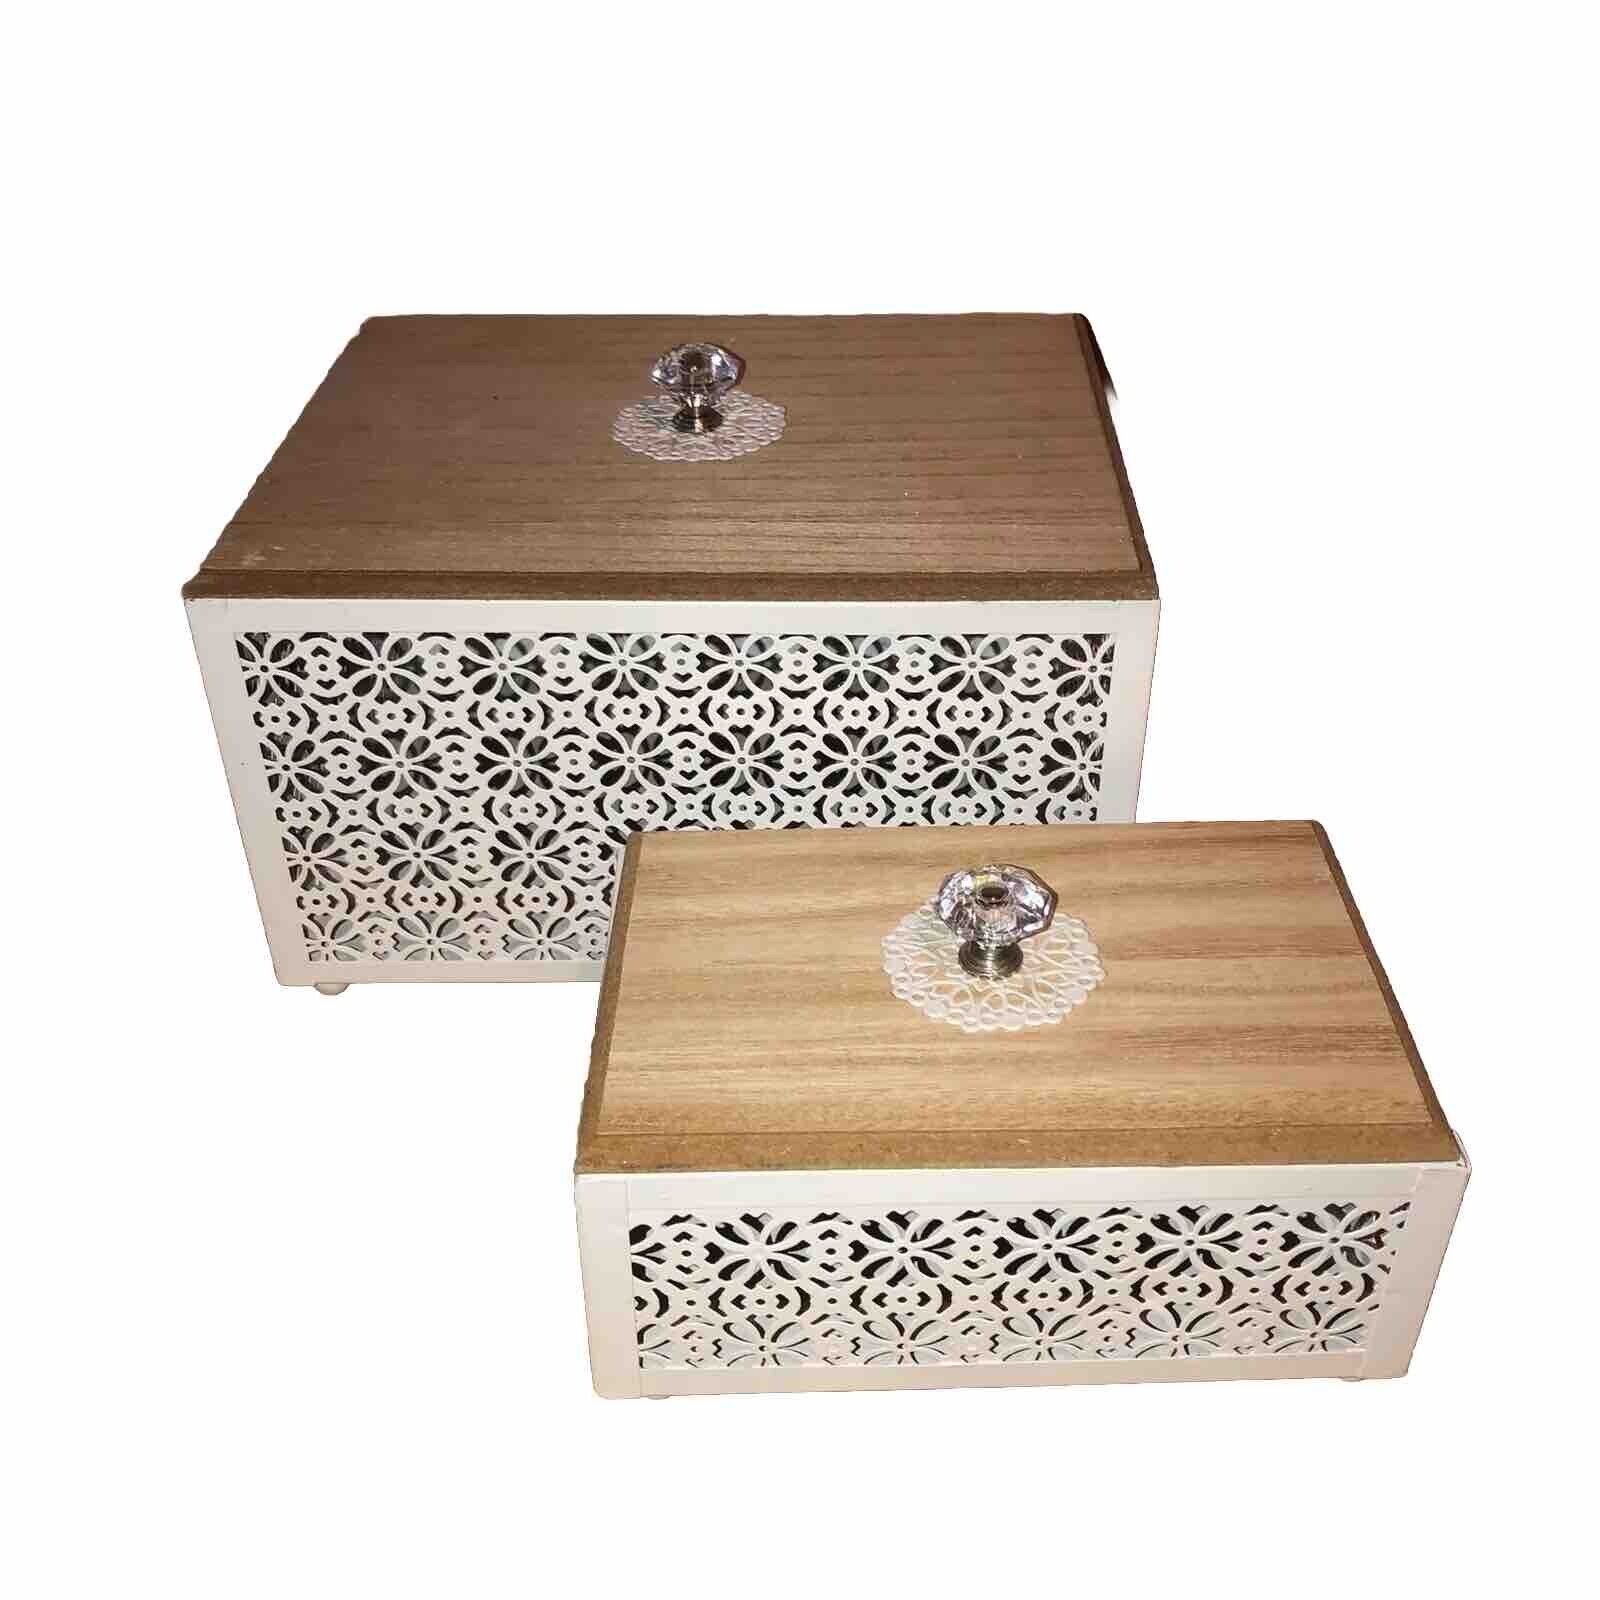 Beautiful Lace Metal And Wood Chic Trinket Jewelry Anything Vanity Boxes ￼nice